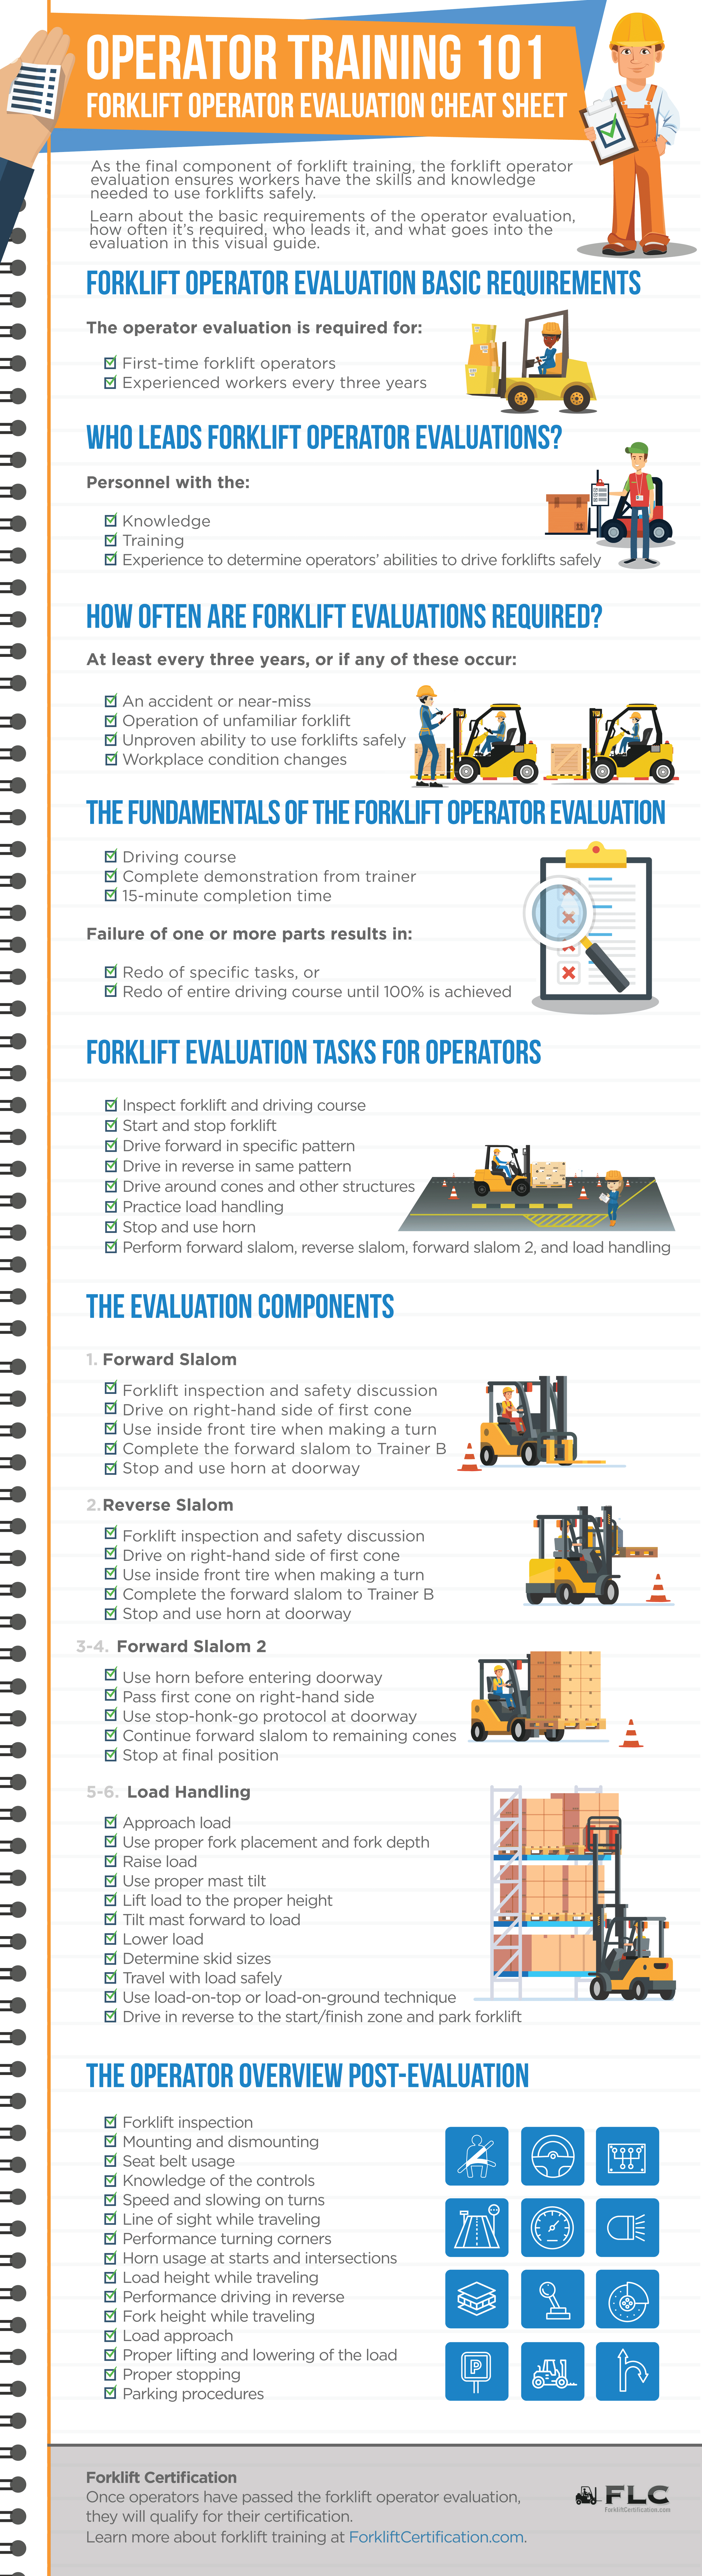 forklift operator training 101 - guide to forklift operator evaluations